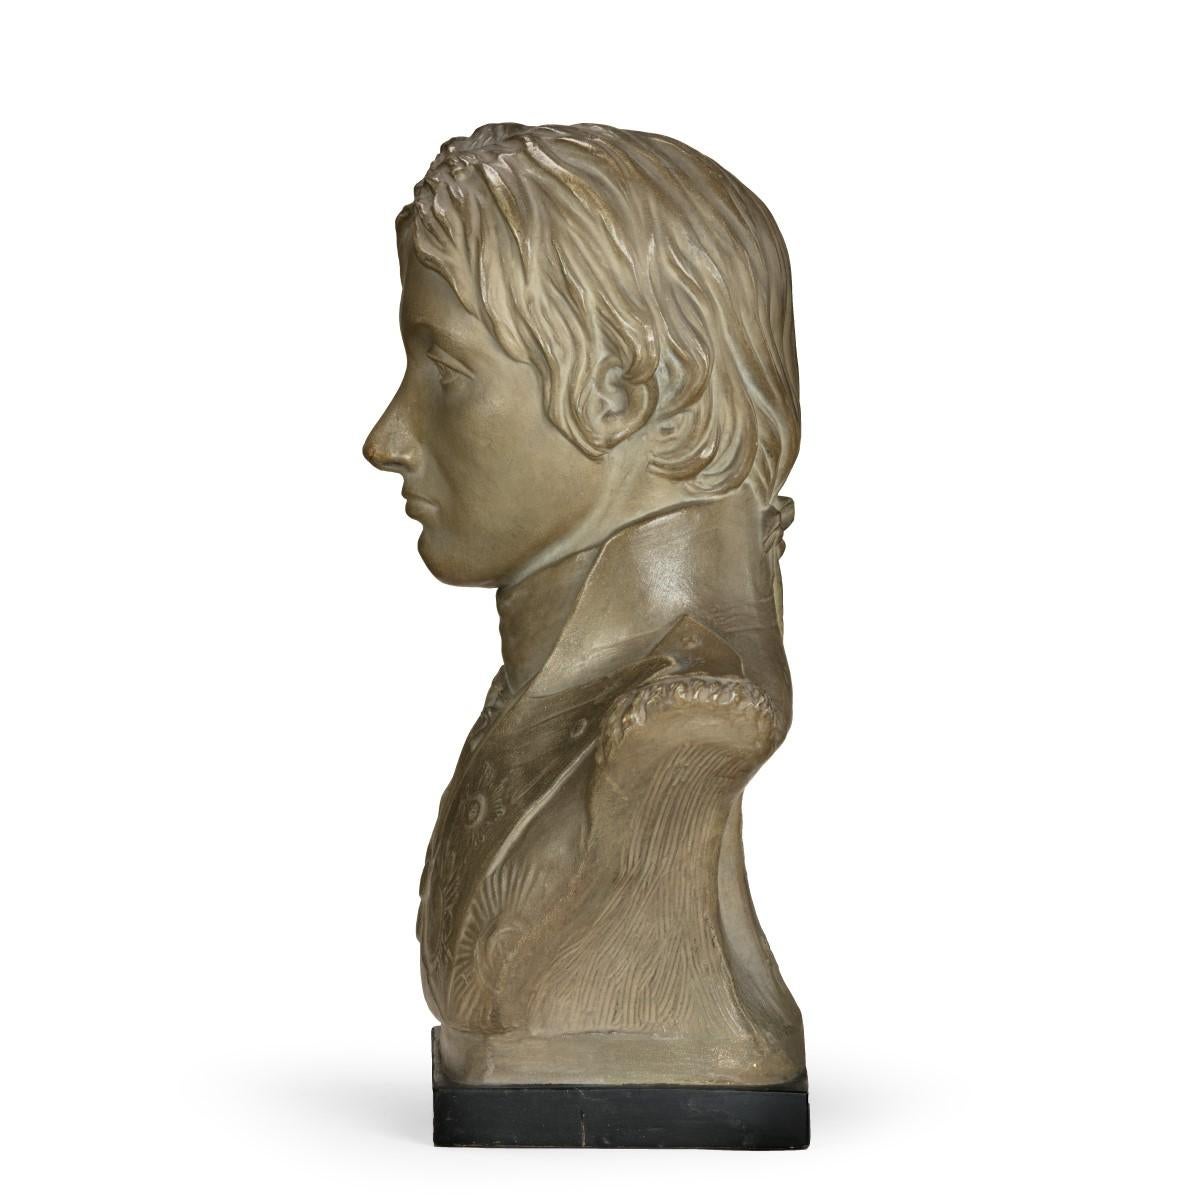 English Plaster Portrait Bust of Lord Nelson after Anne Seymour Damer, England, 1802